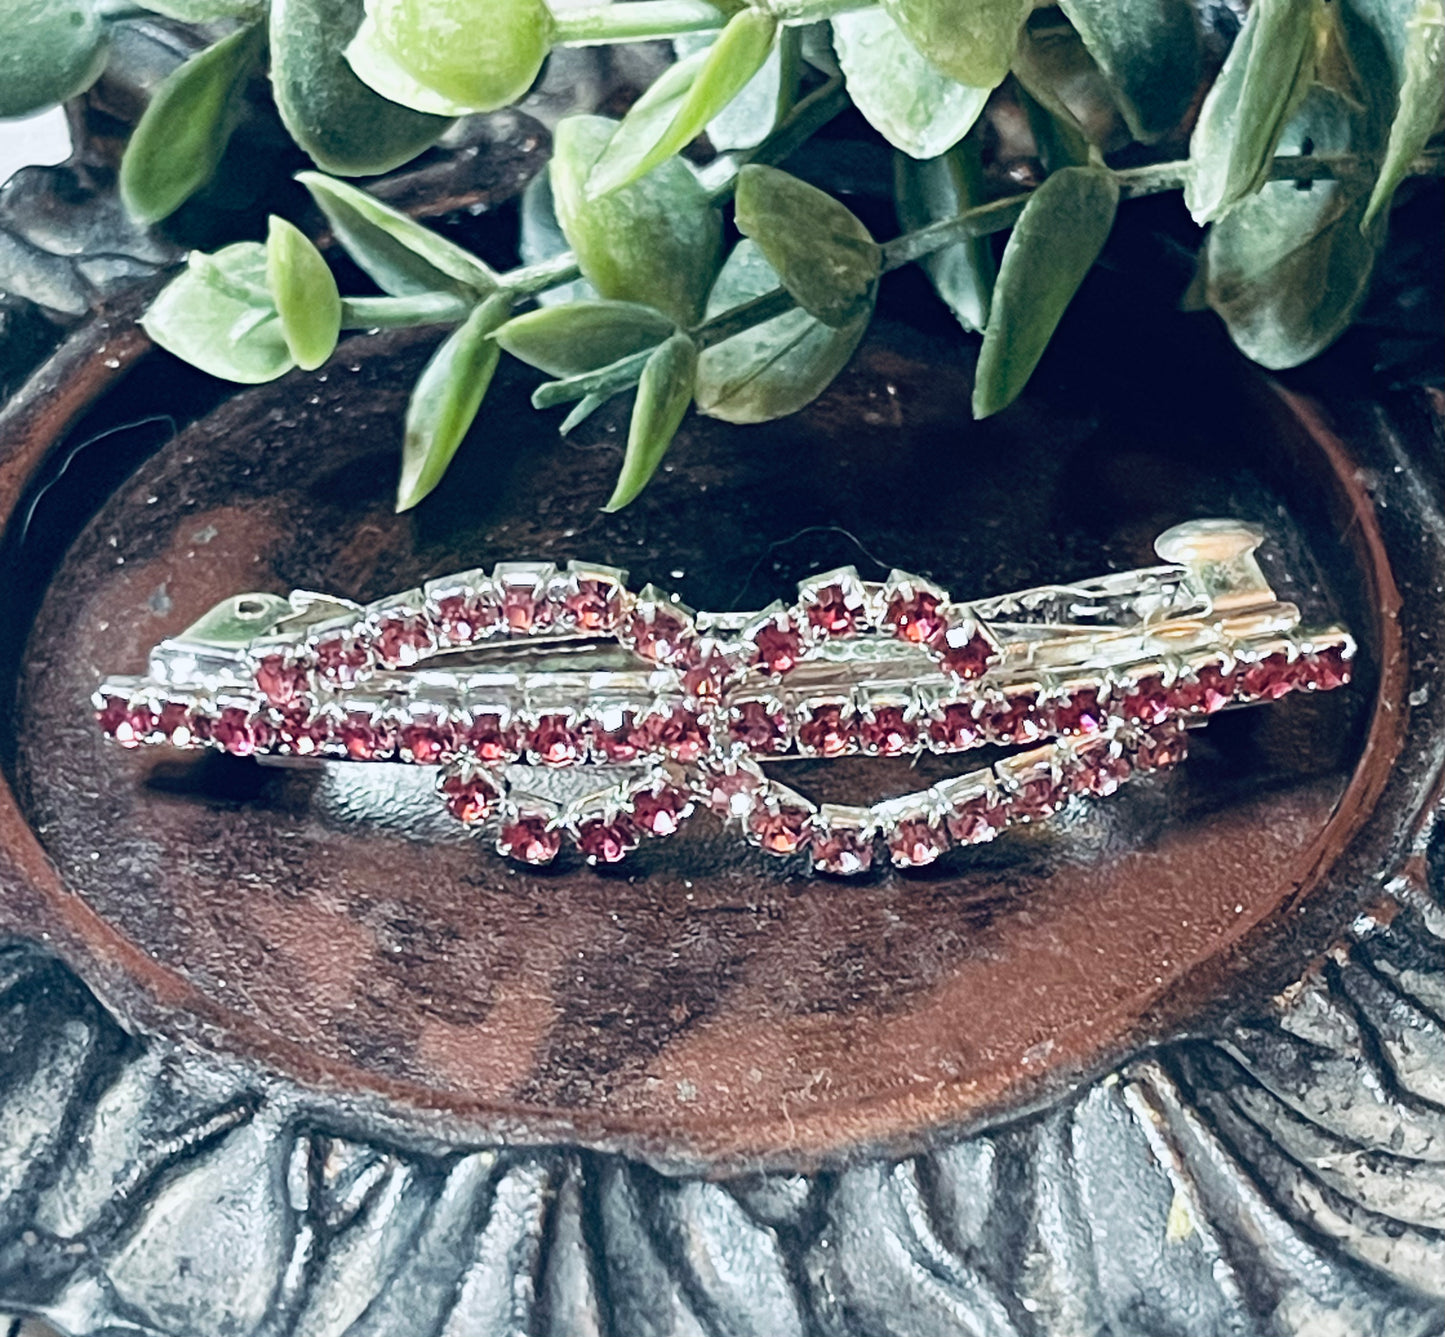 Pink Crystal rhinestone barrette approximately 3.0” silver tone formal hair accessories gift wedding bridesmaid prom birthday mother of bride groom